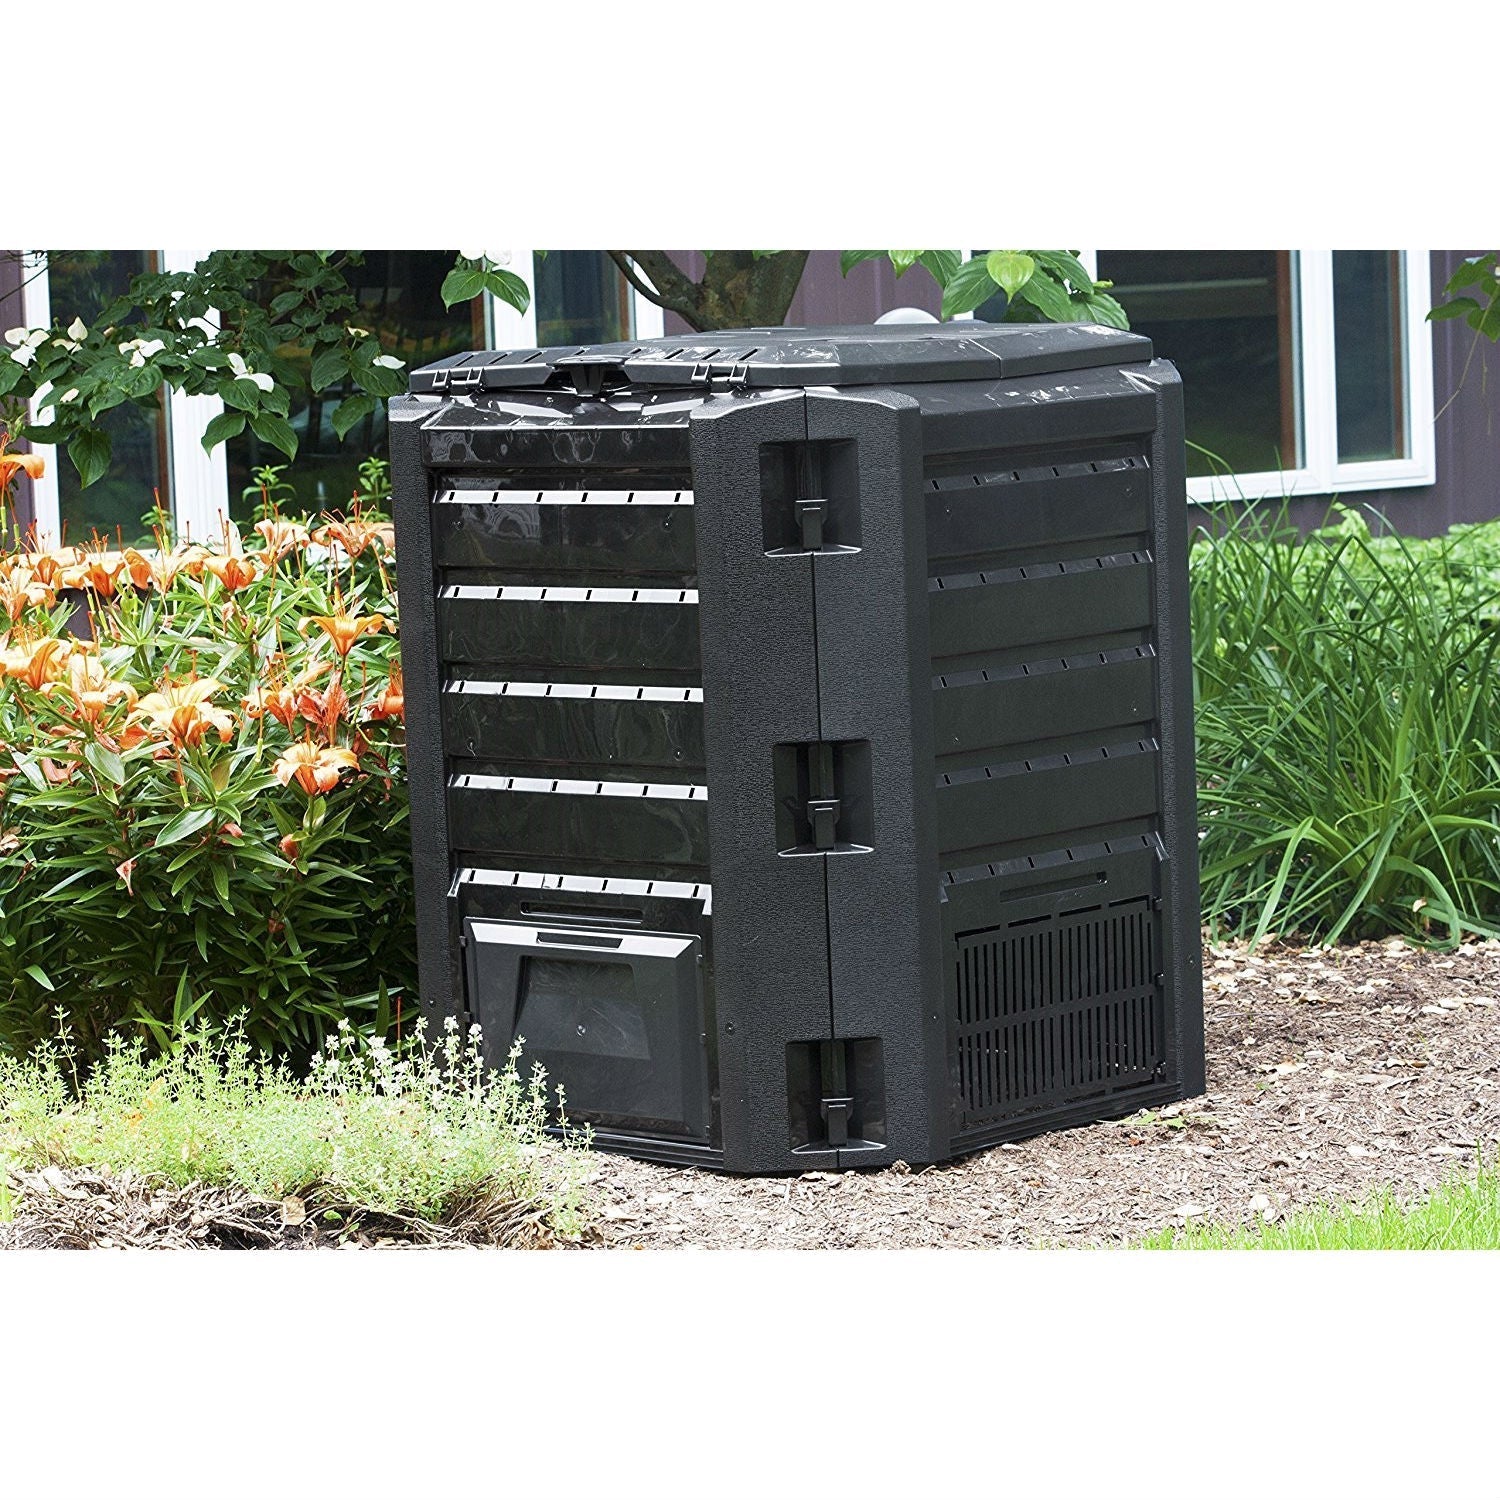 Outdoor > Gardening > Compost Bins - Black Composter 100-Gallon Compost Bin For Home Composting